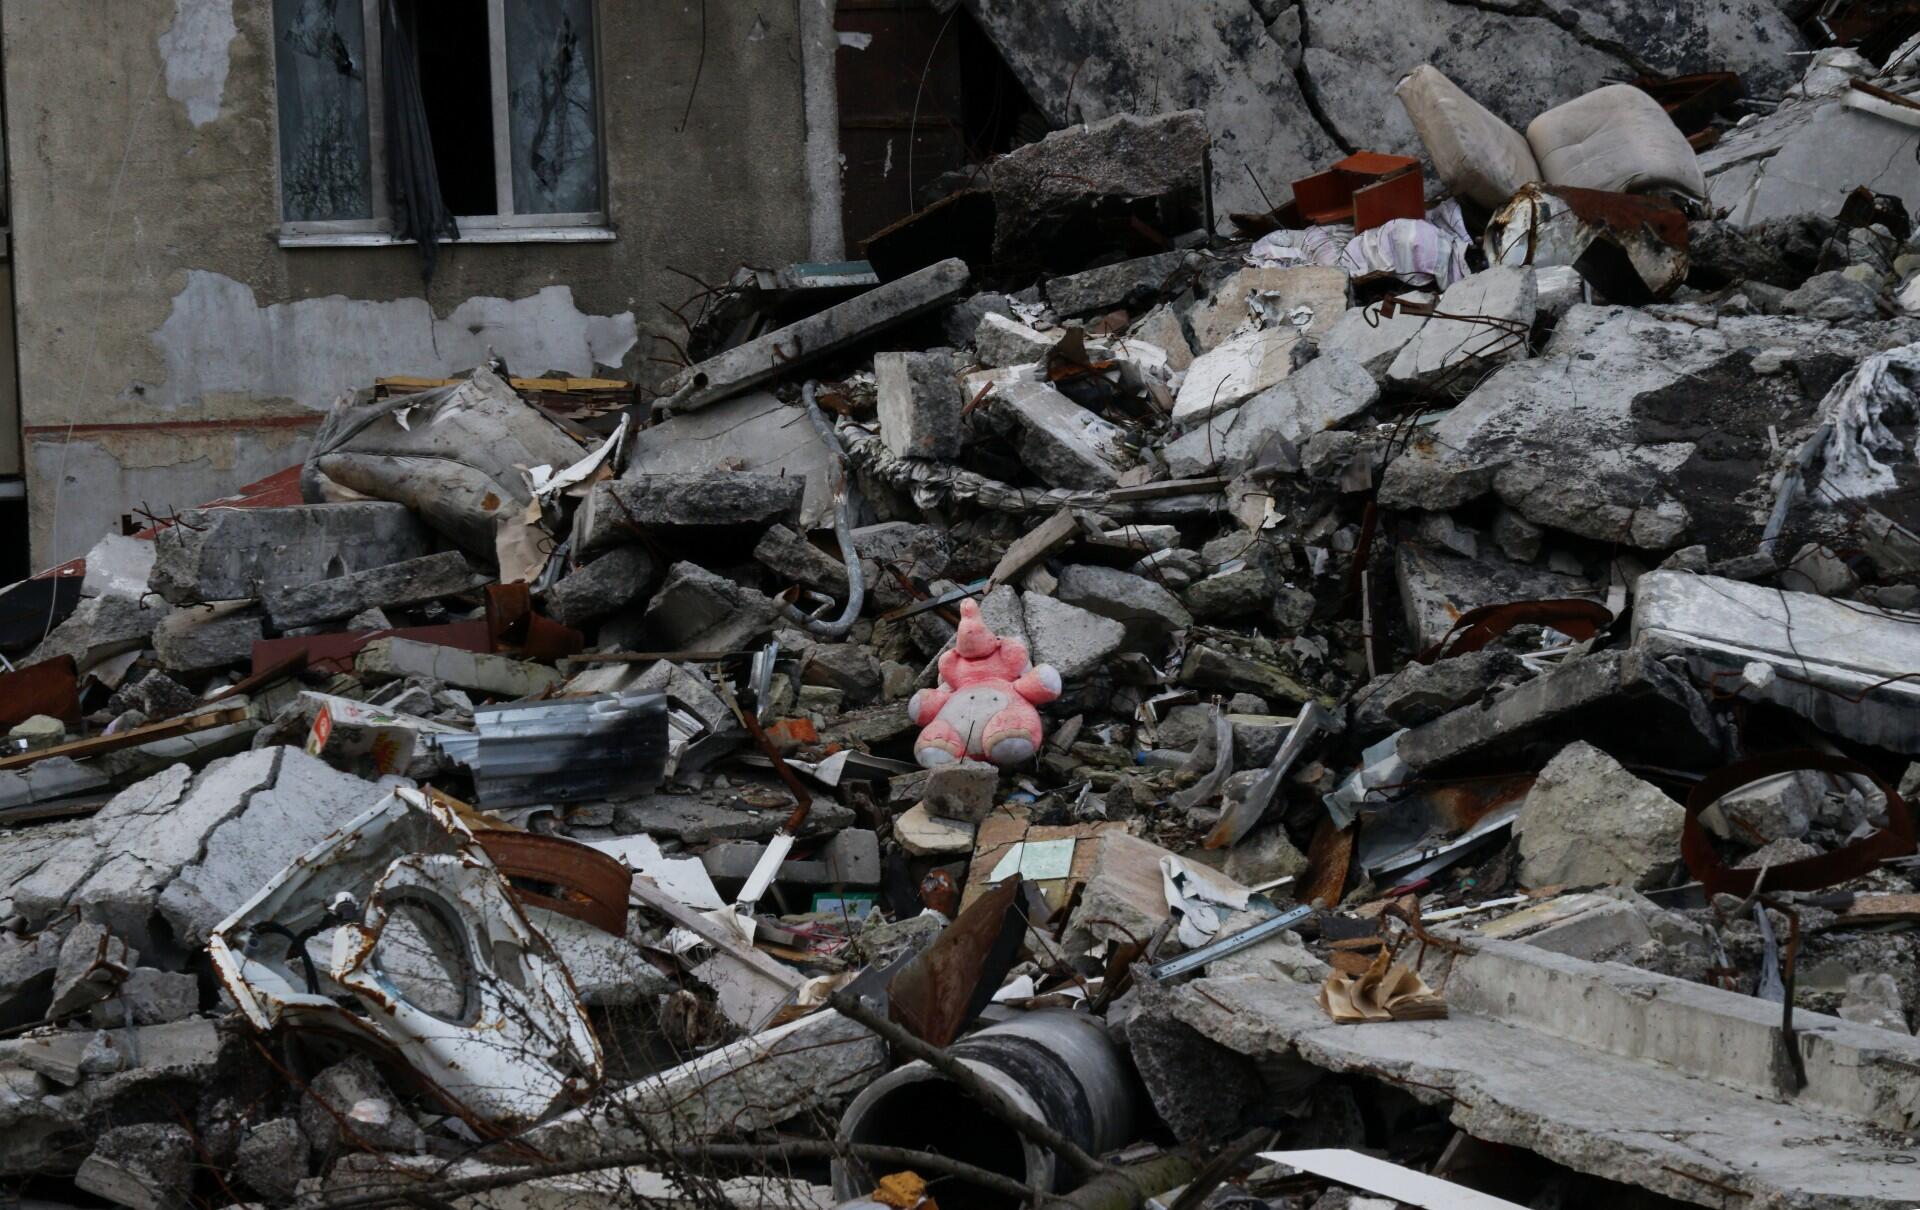 A pink stuffed animal sits amidst a pile of rubble in Ukraine.